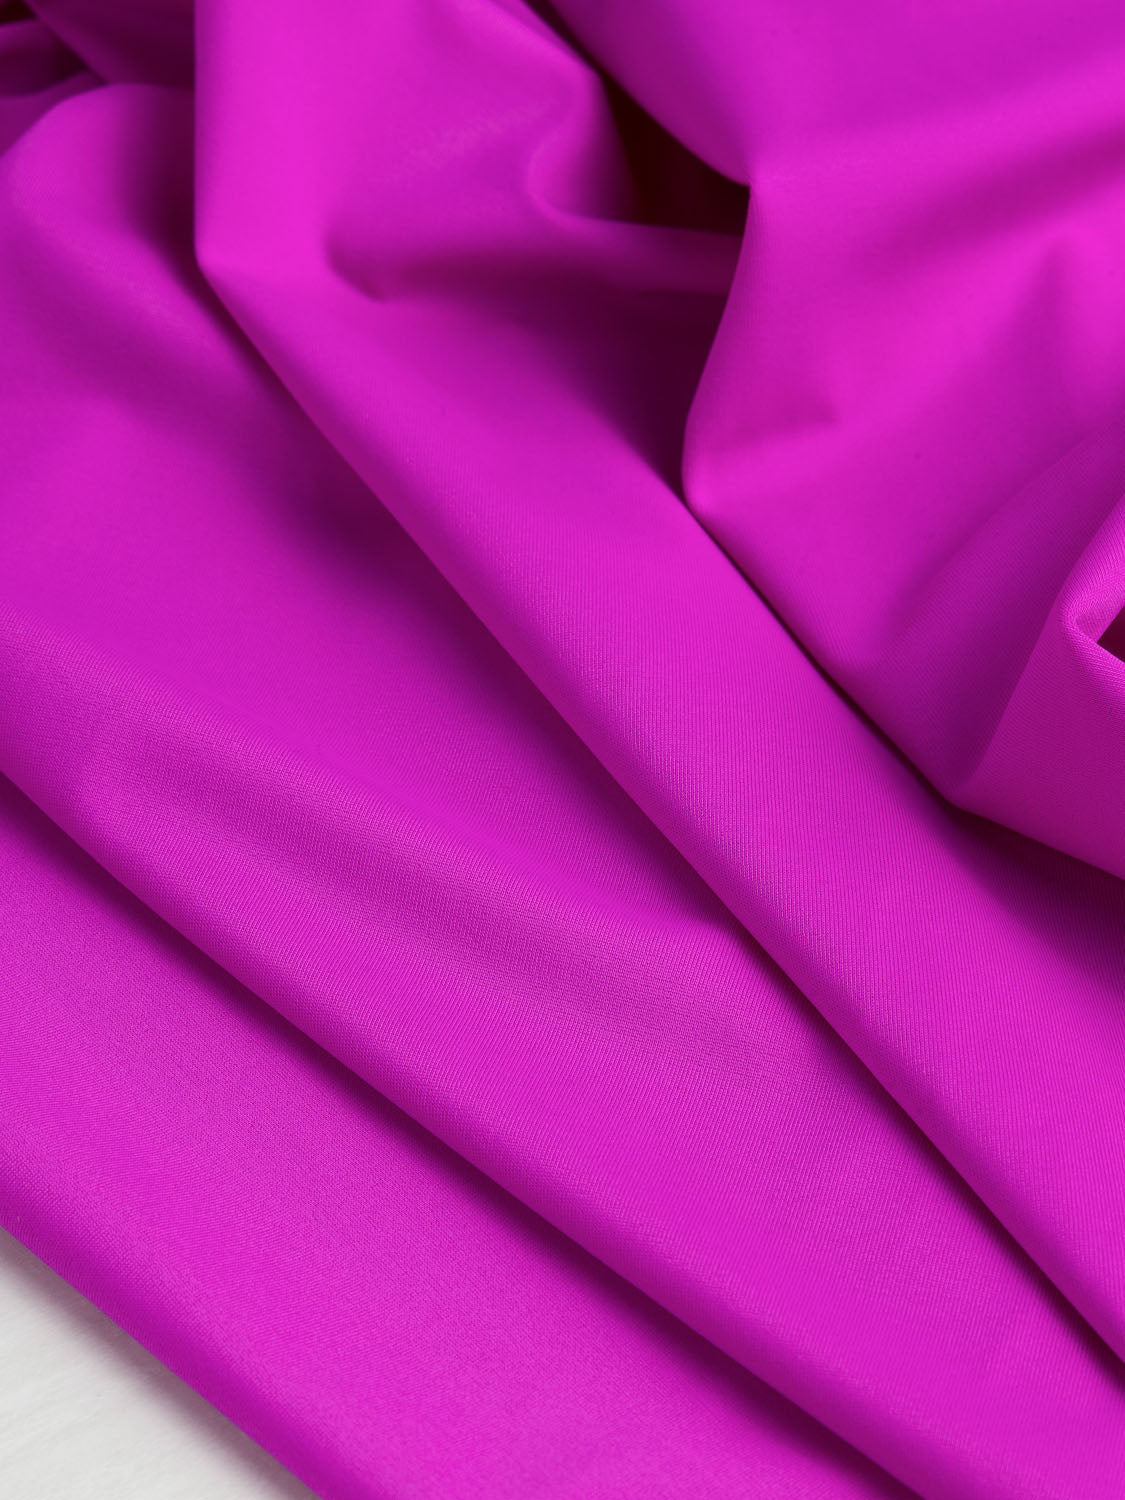 Sourcing Swimsuit Fabric & Supplies